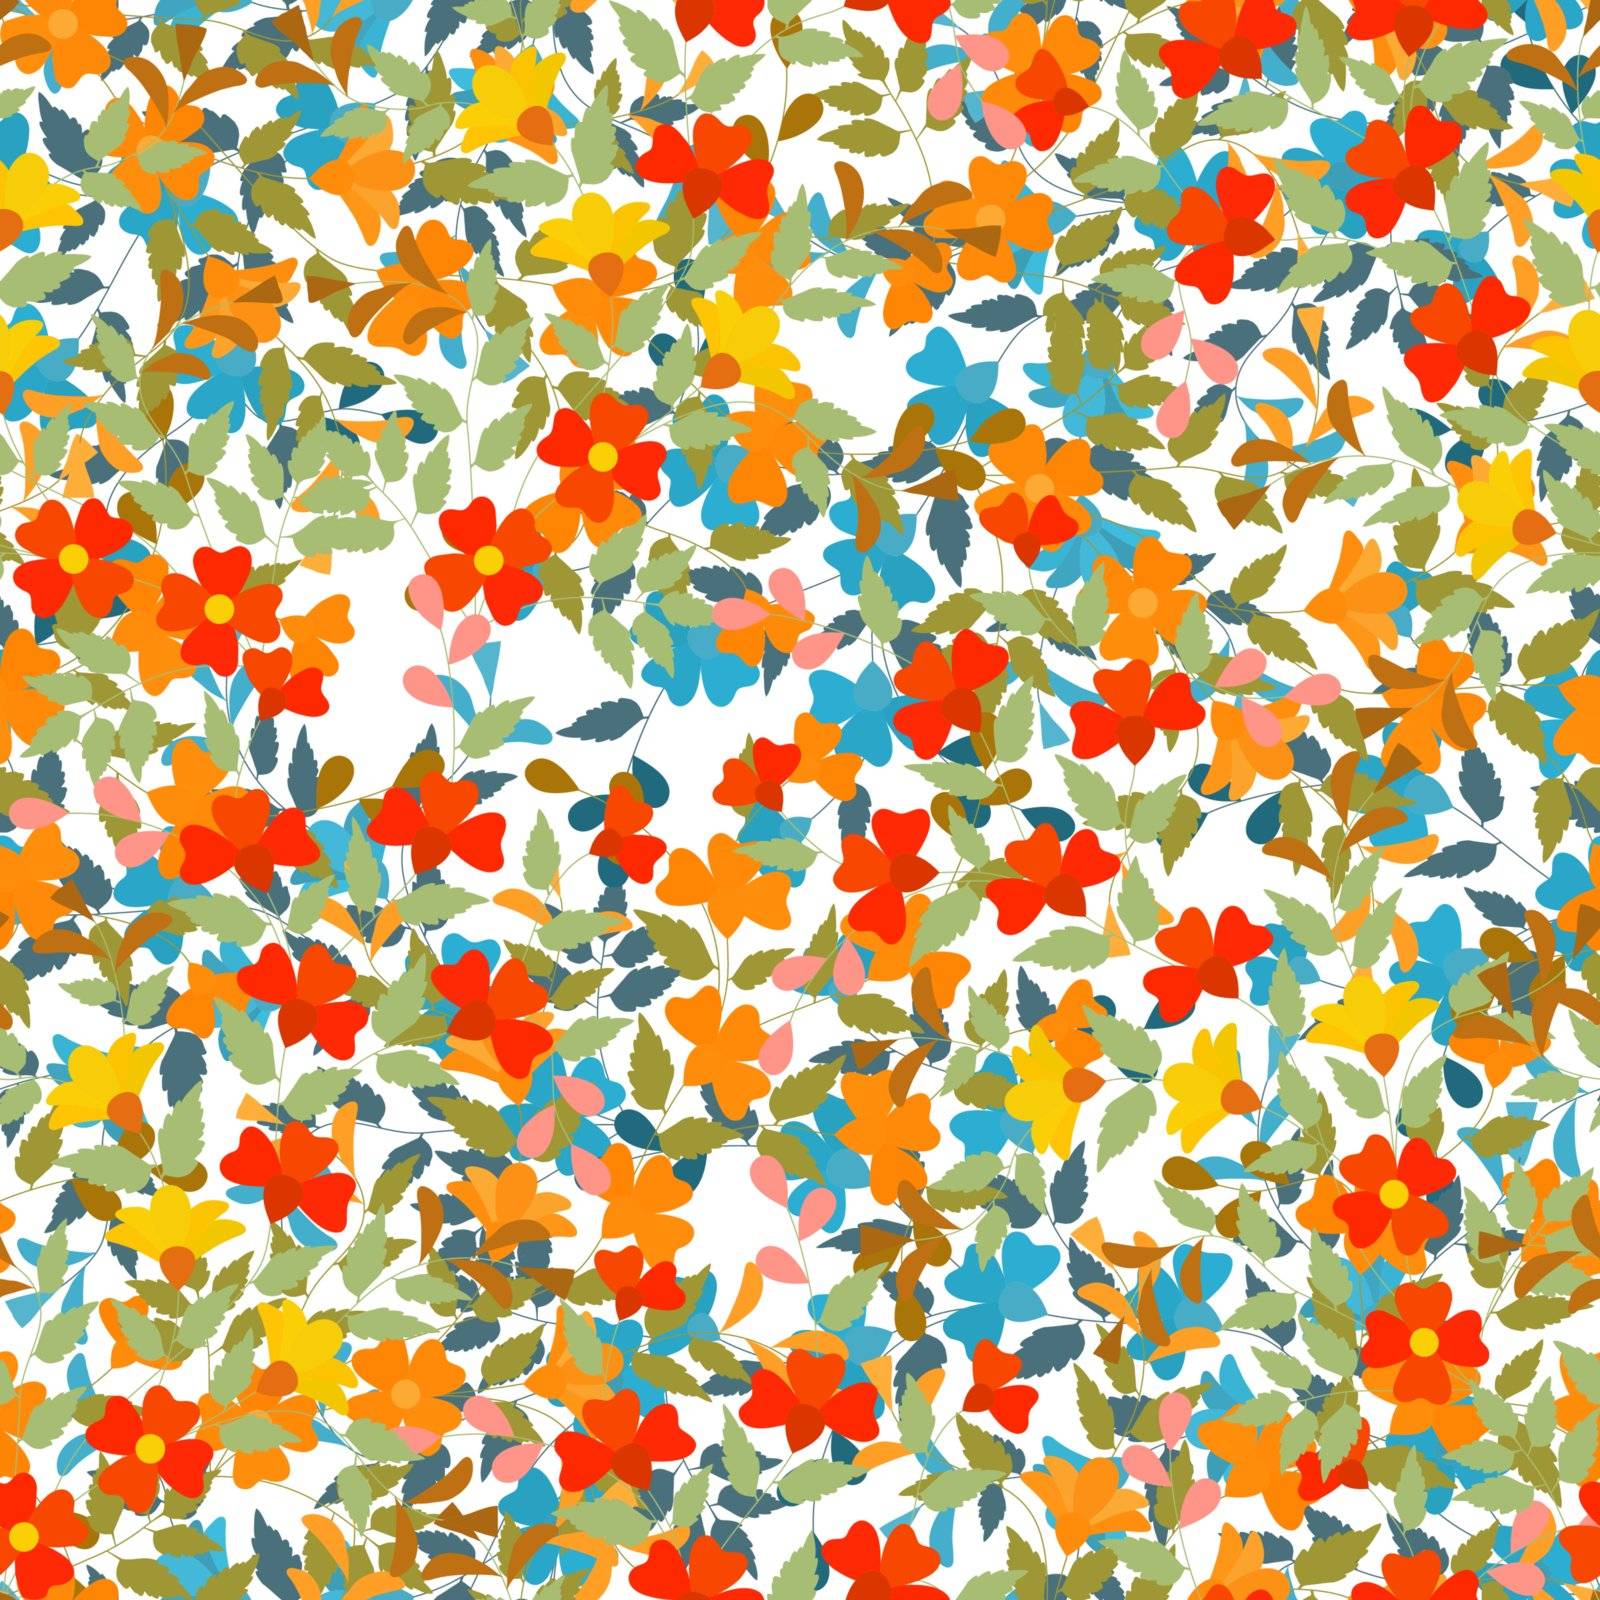 Editable vector seamless tile of multicolored flowers